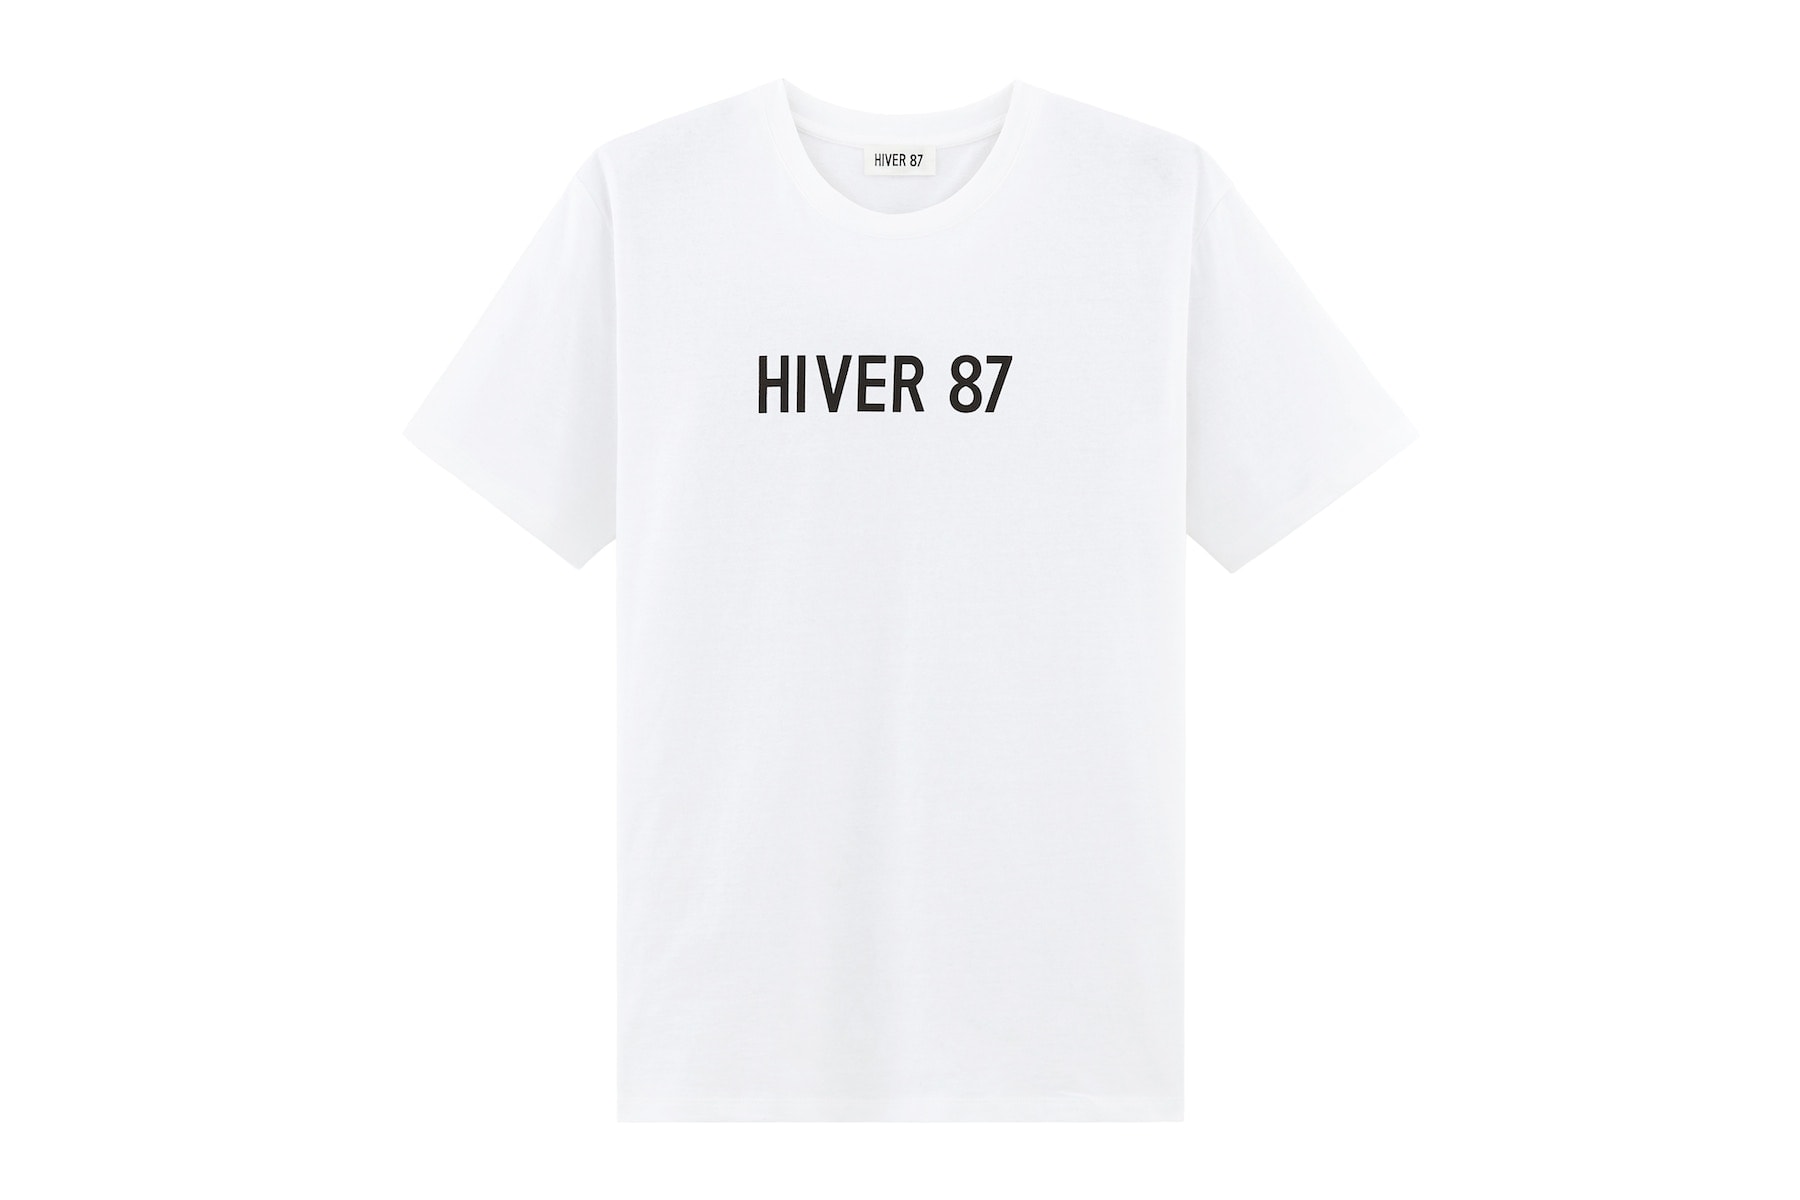 A.P.C. "HIVER 87" 30th Anniversary Products